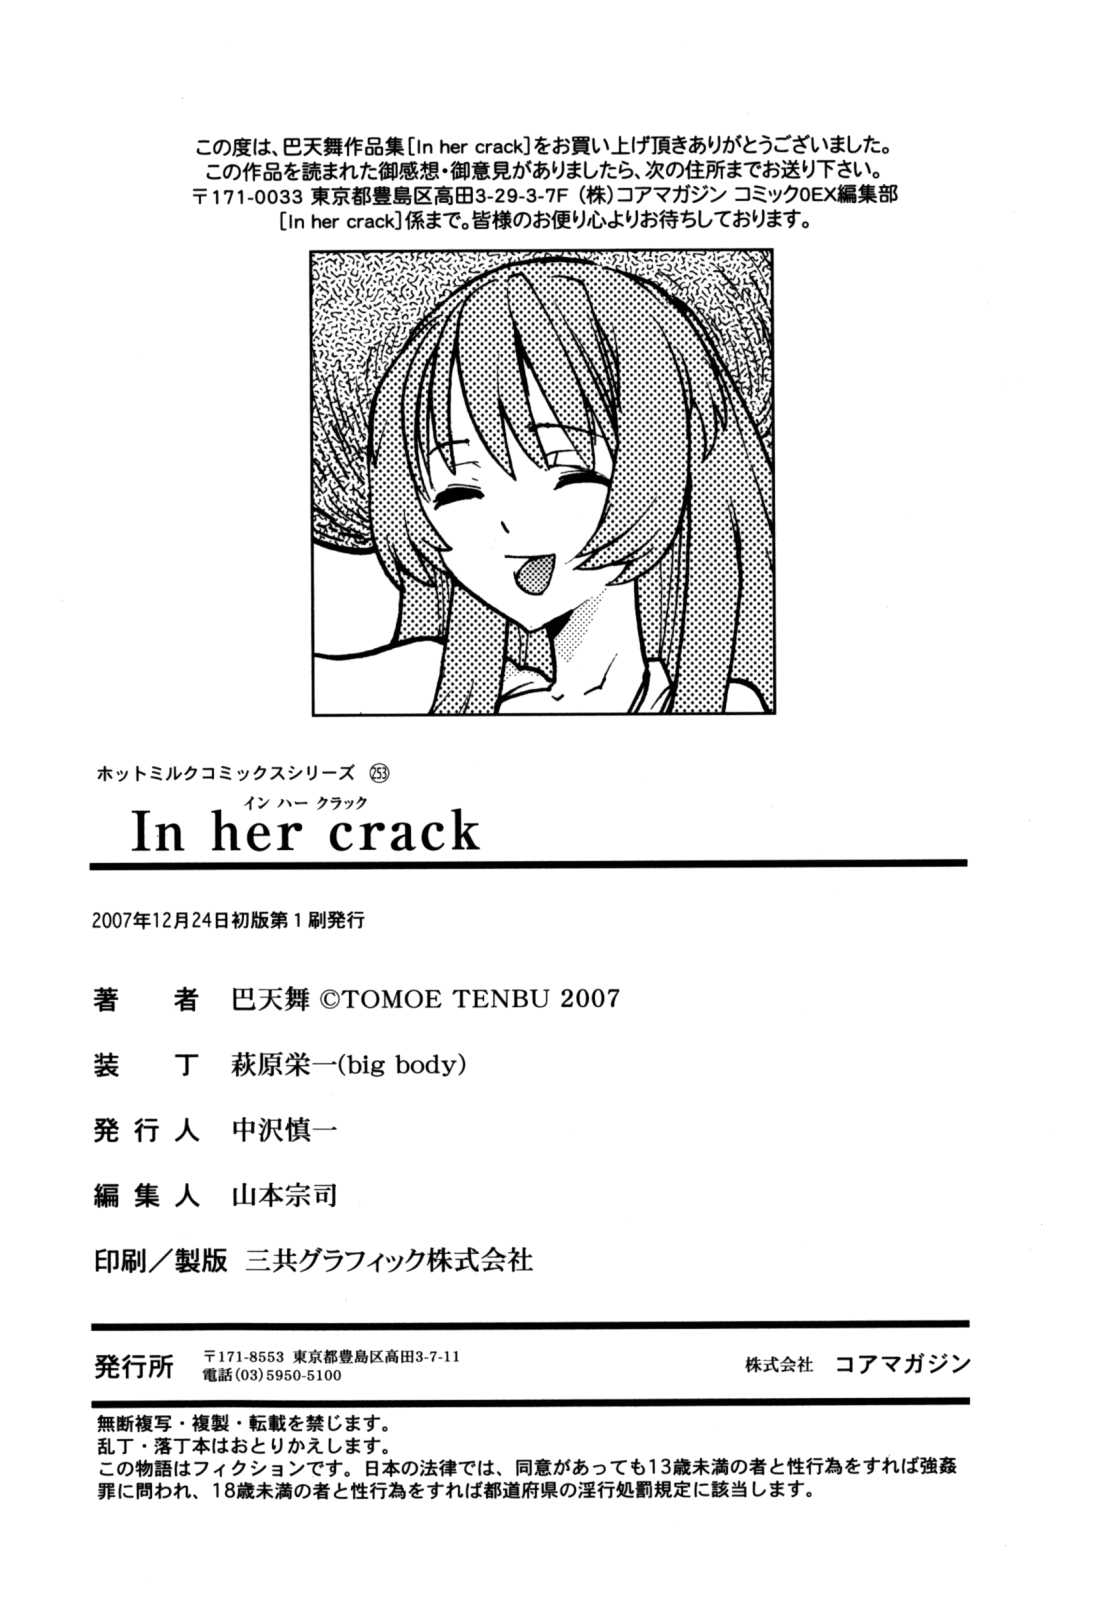 [Tomoe Tenbu] In Her Crack (Complete) [English] [Tadanohito + Afro + Fayt] 